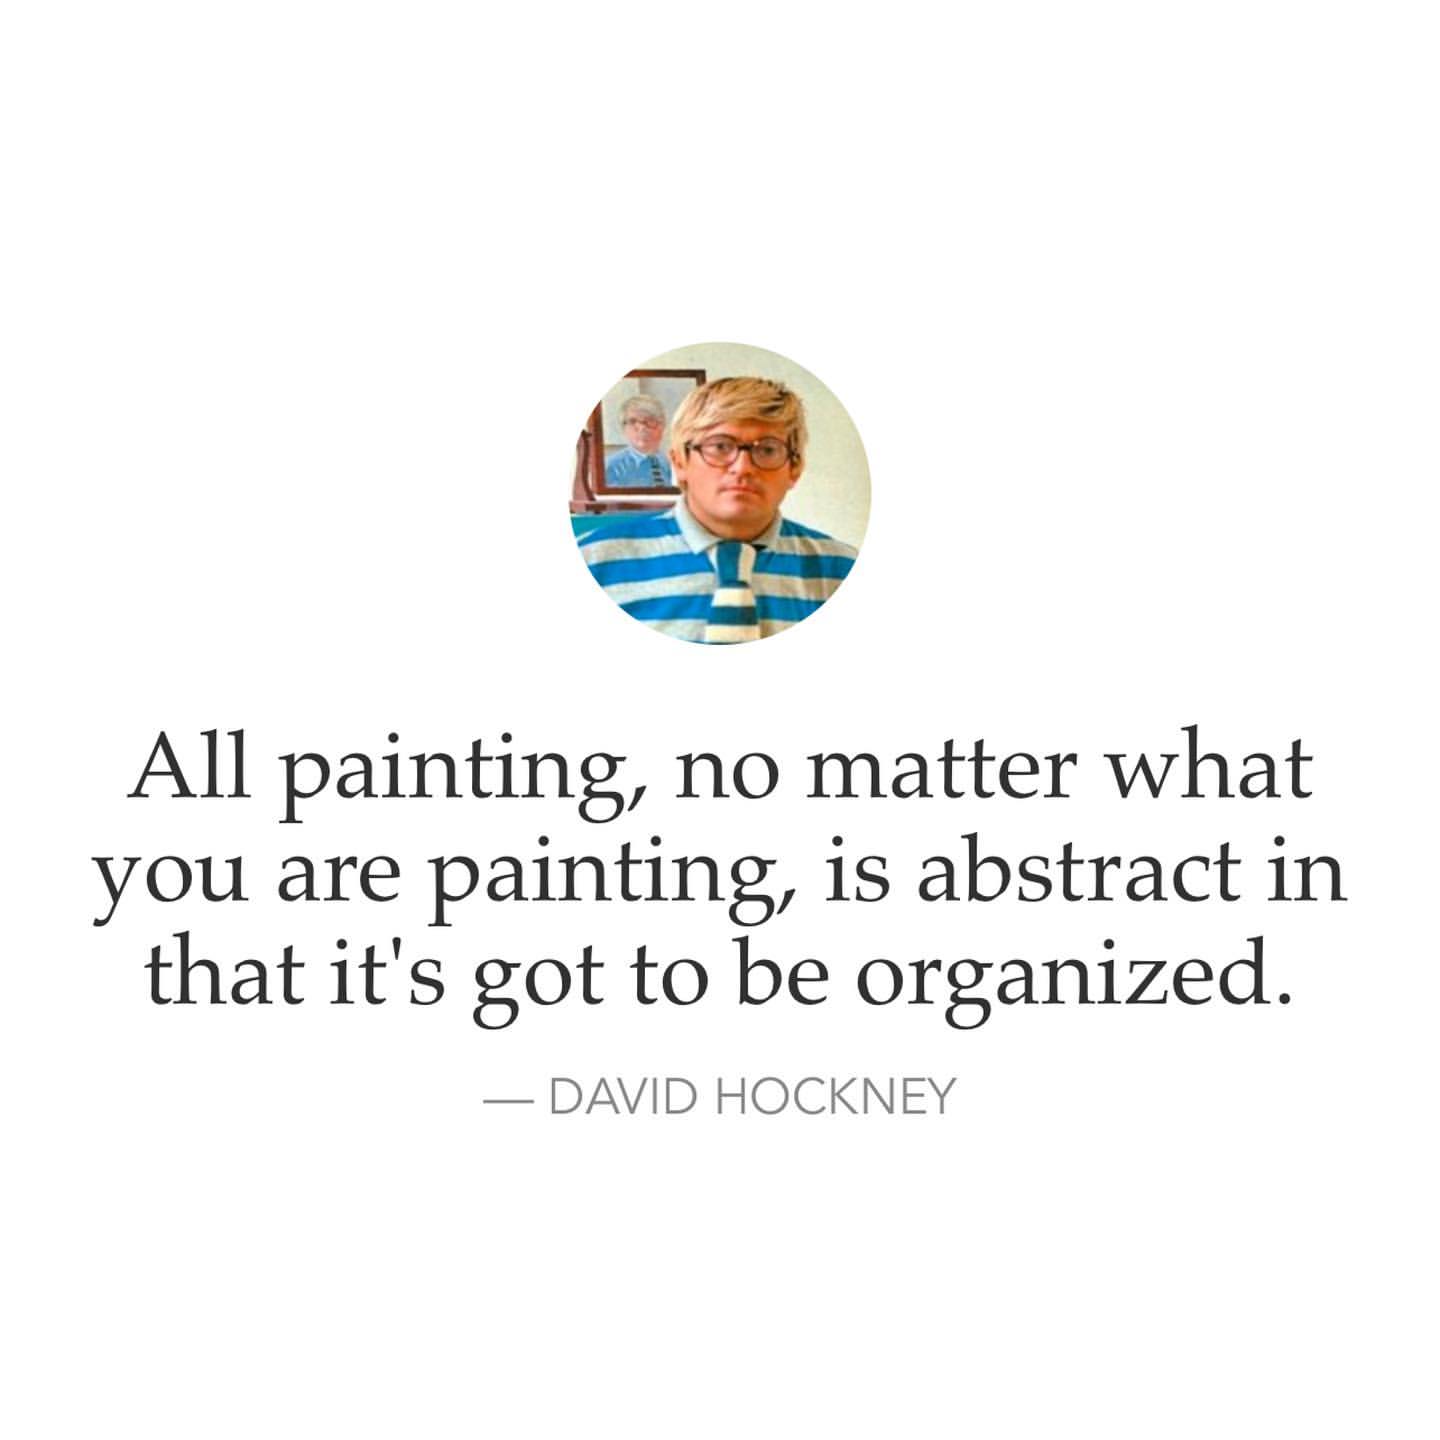 All painting, no matter what you are painting, is abstract in that it's got to be organized. David Hockney.